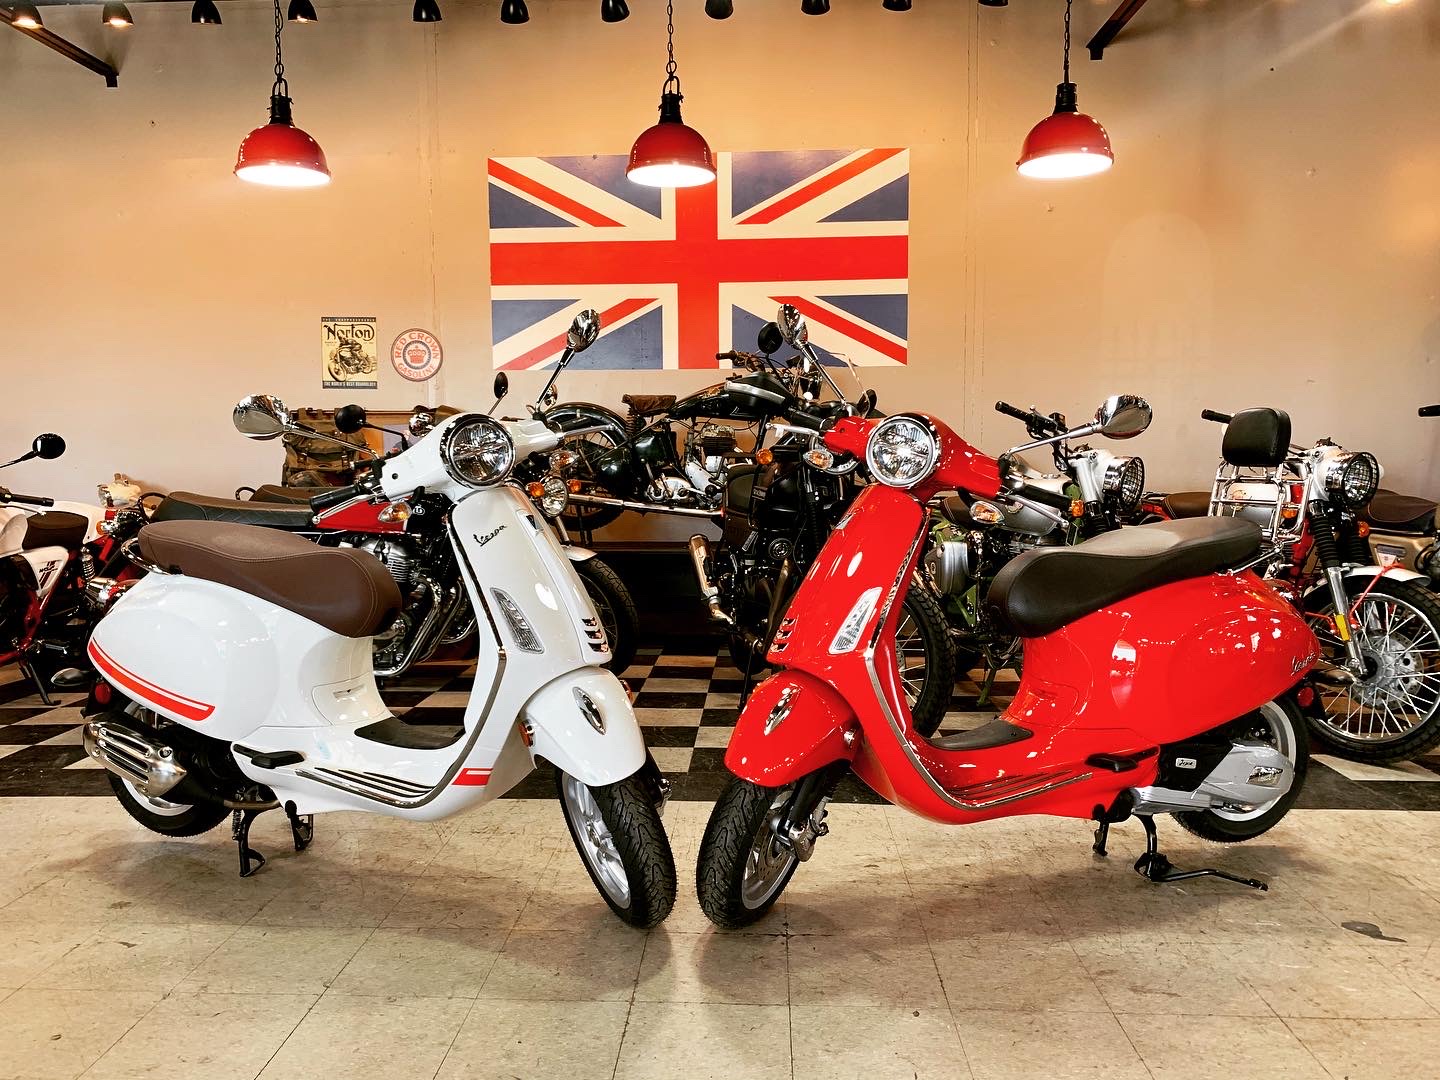 The Motorcycle Shop – Scooters, motorcycles sales, service, and parts.